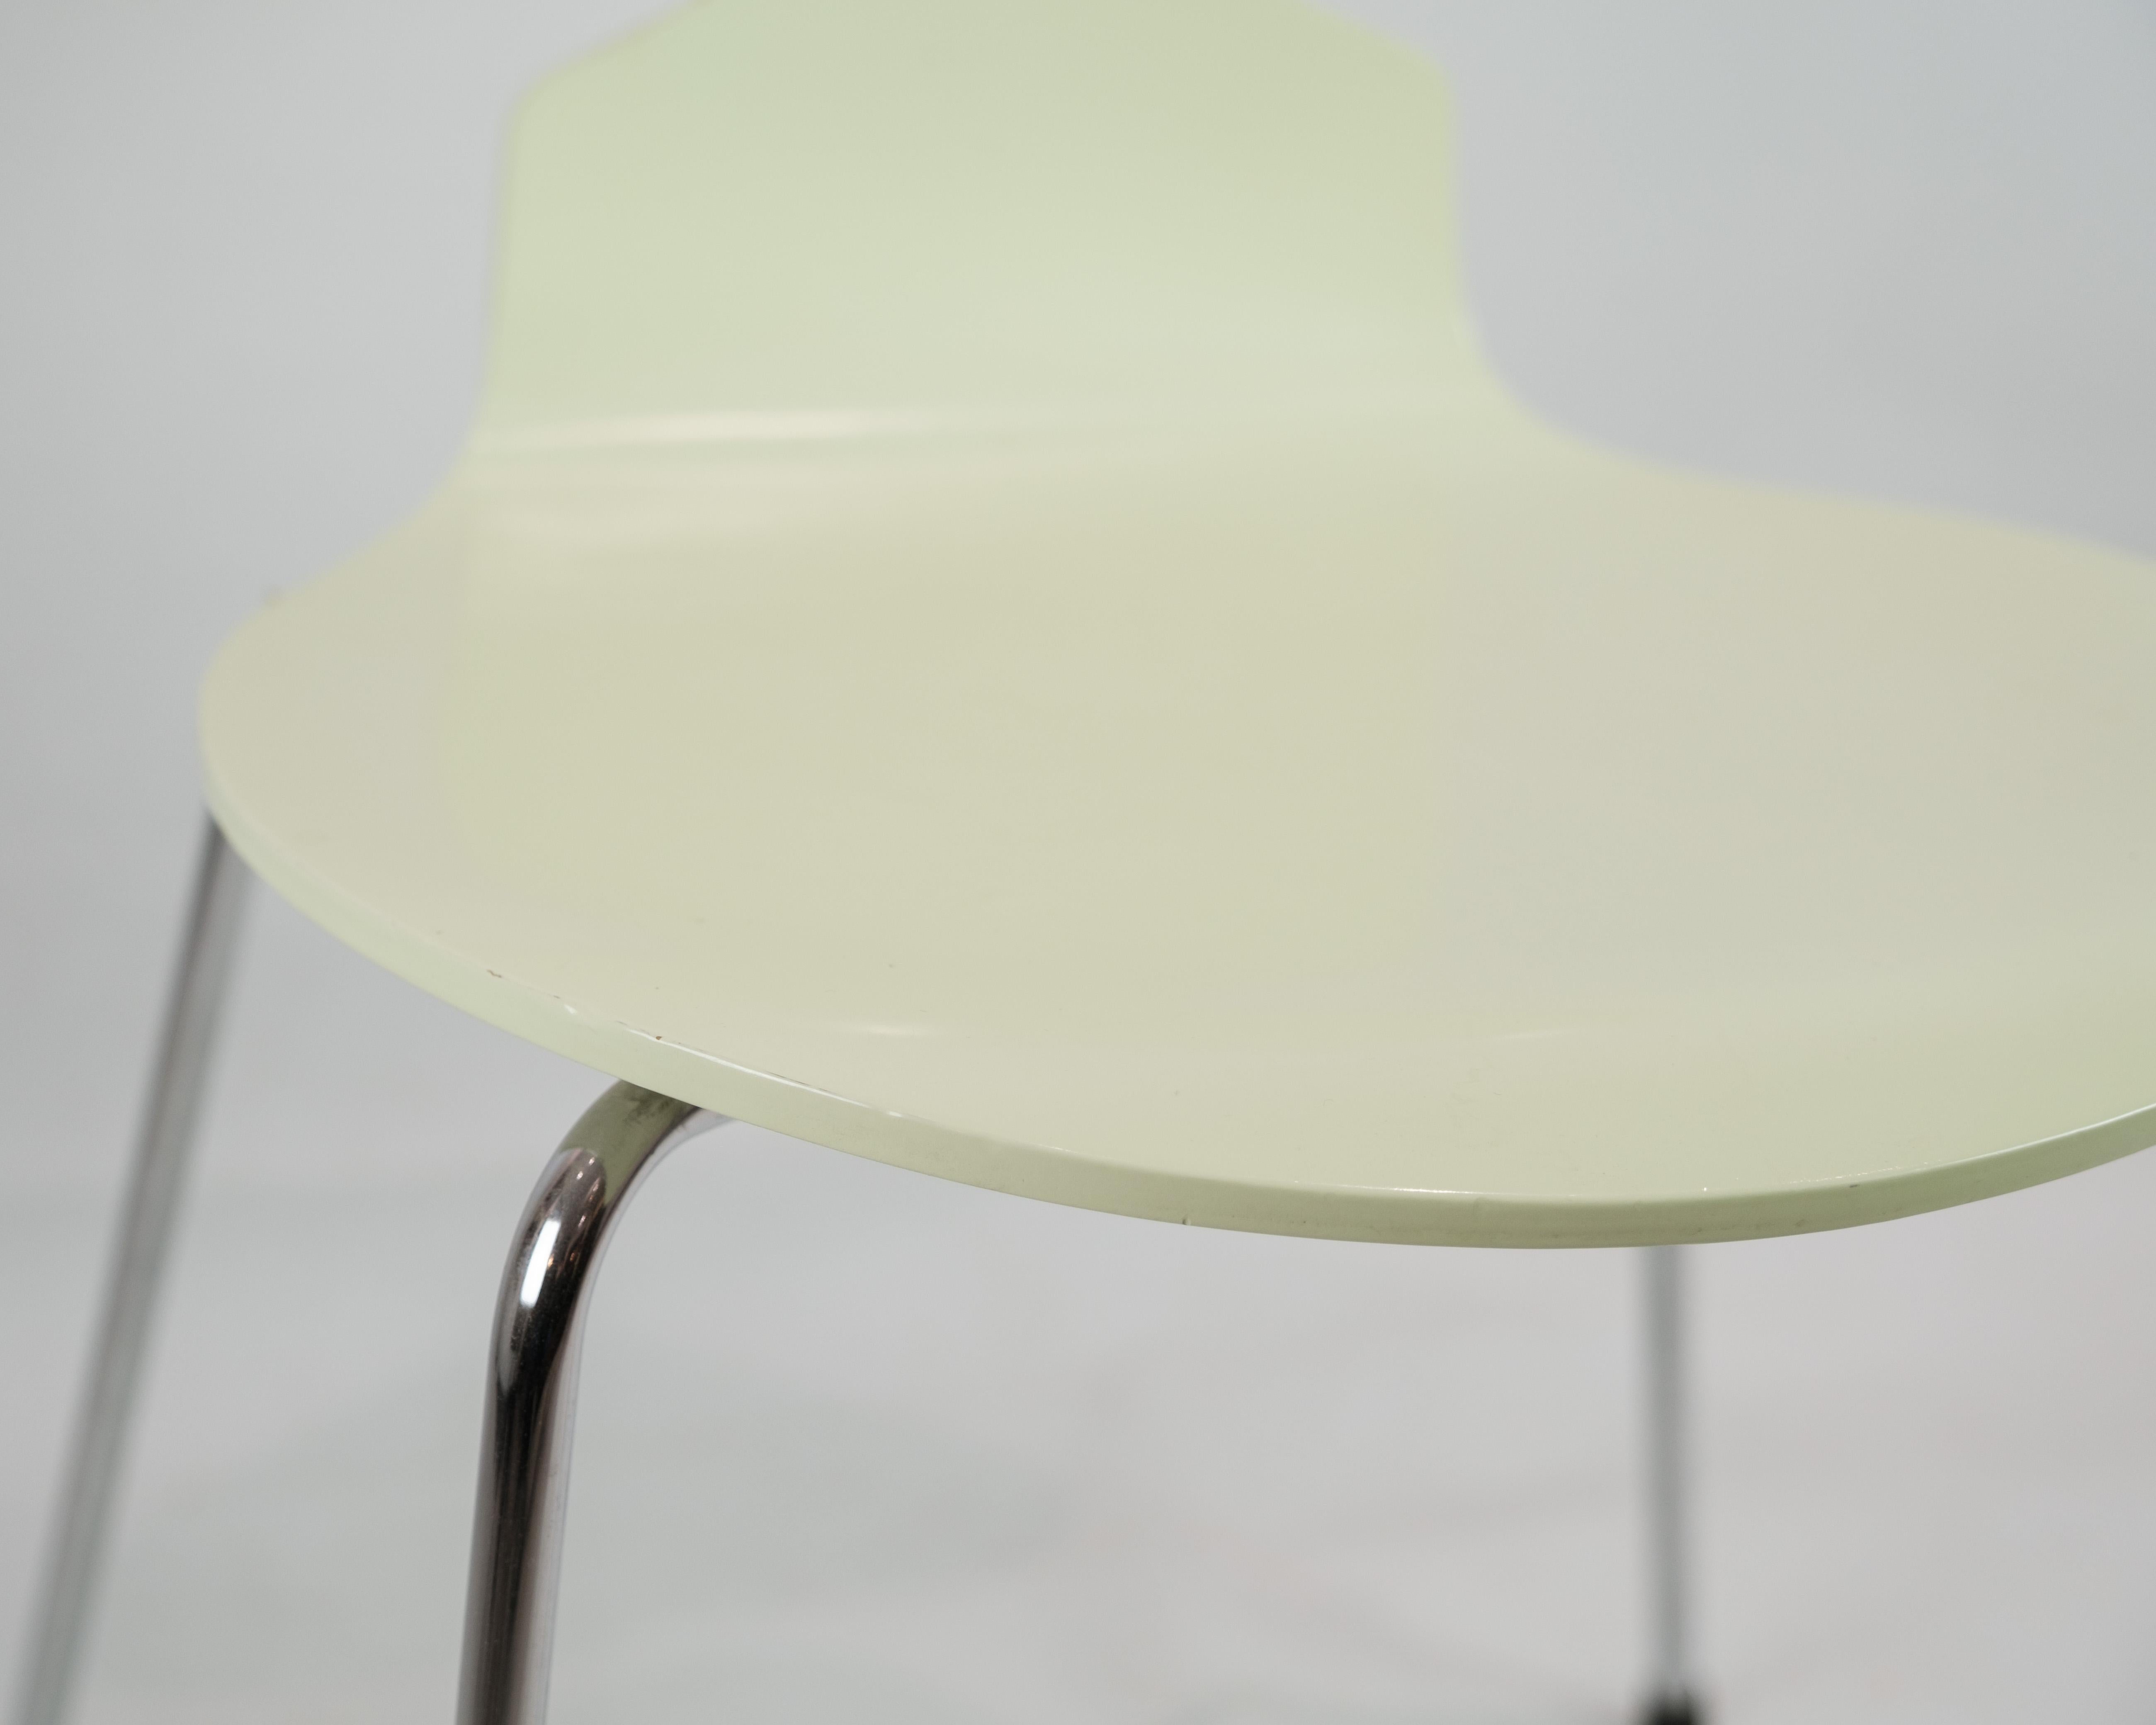 Original Ant Chairs Model 3101 In Pastel Green By Arne Jacobsen From 1970s For Sale 3